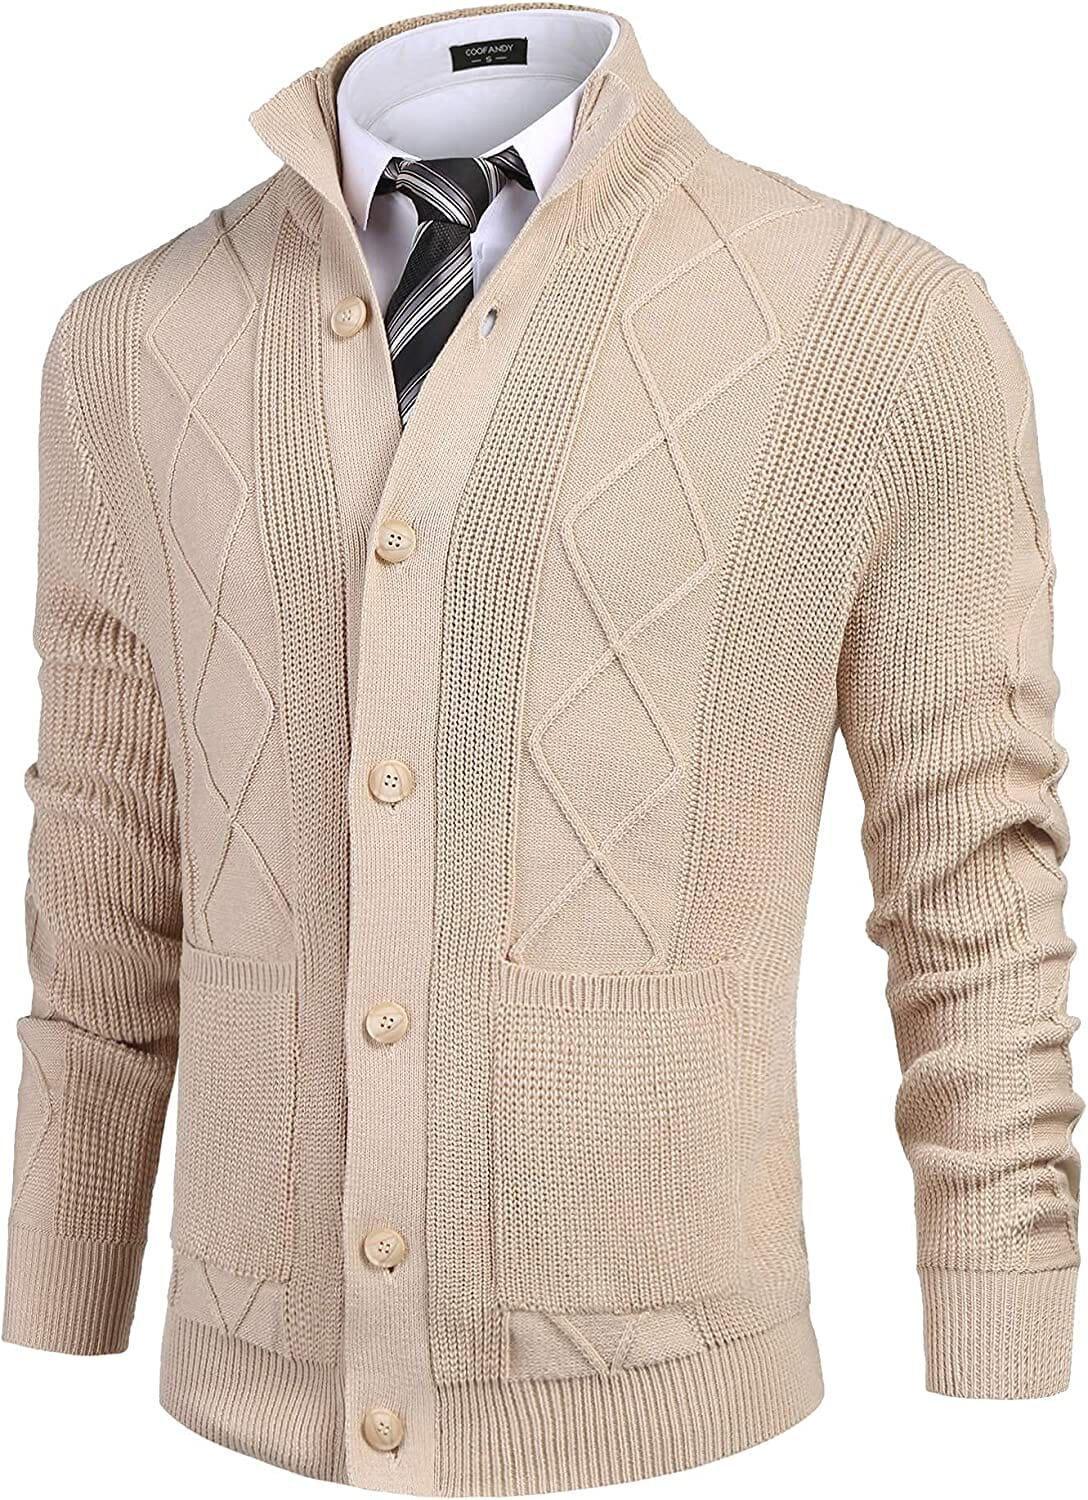 Casual Stand Collar Button Down Cardigan with Pockets (US Only) Cardigans COOFANDY Store Khaki S 